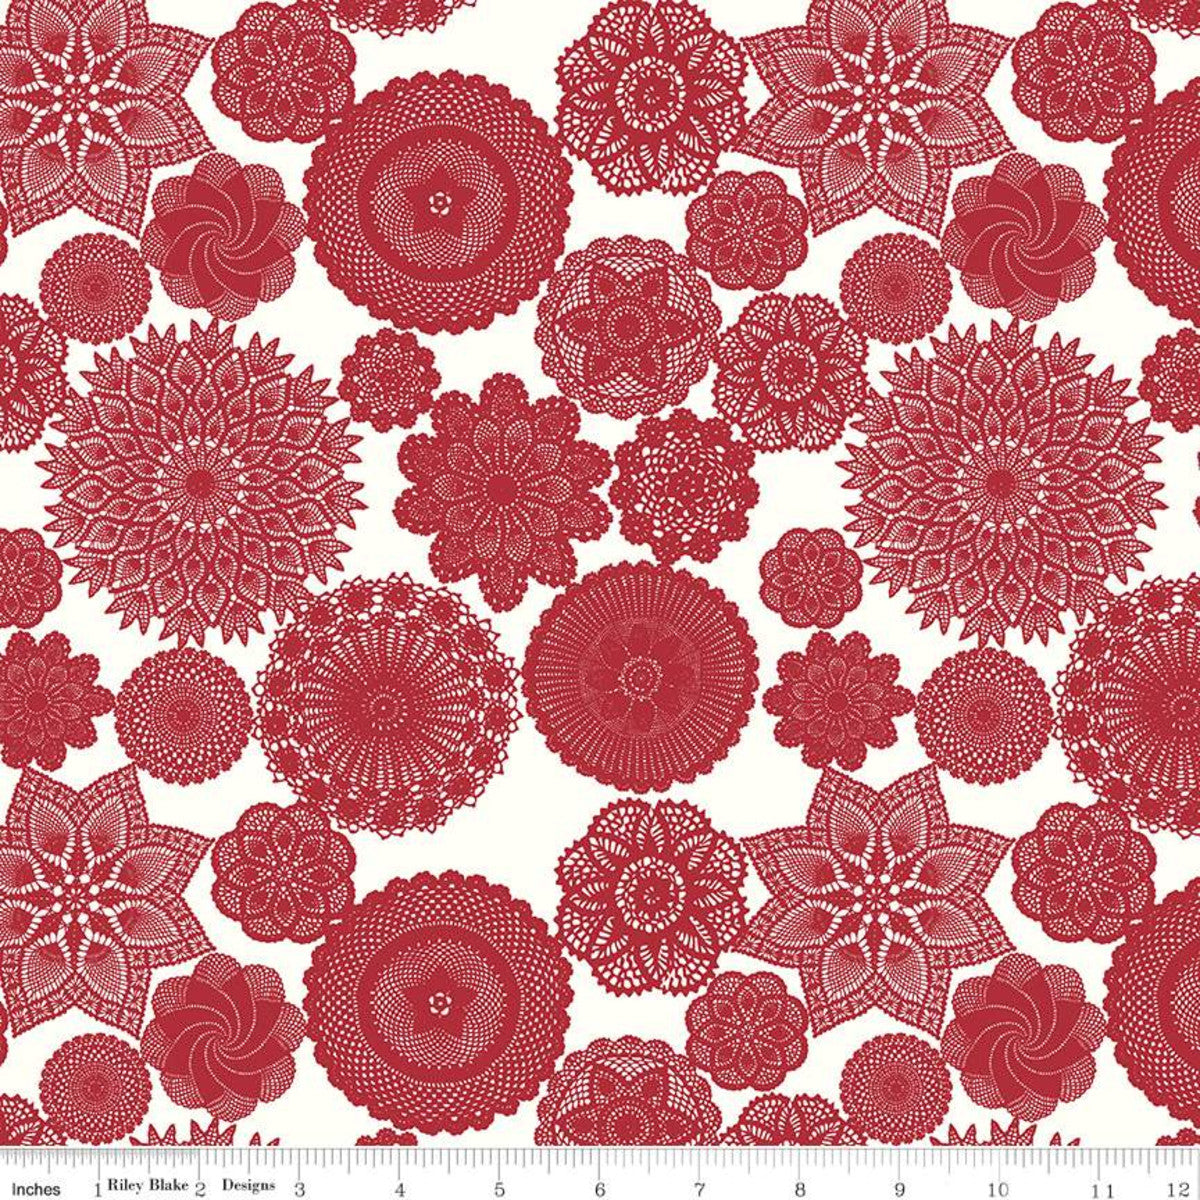 Red Hot Collection Doilies Cream Beverly McCullough for Riley Blake Designs Cotton Quilt Fabric Material lace look lacey flowers spiral spirograph